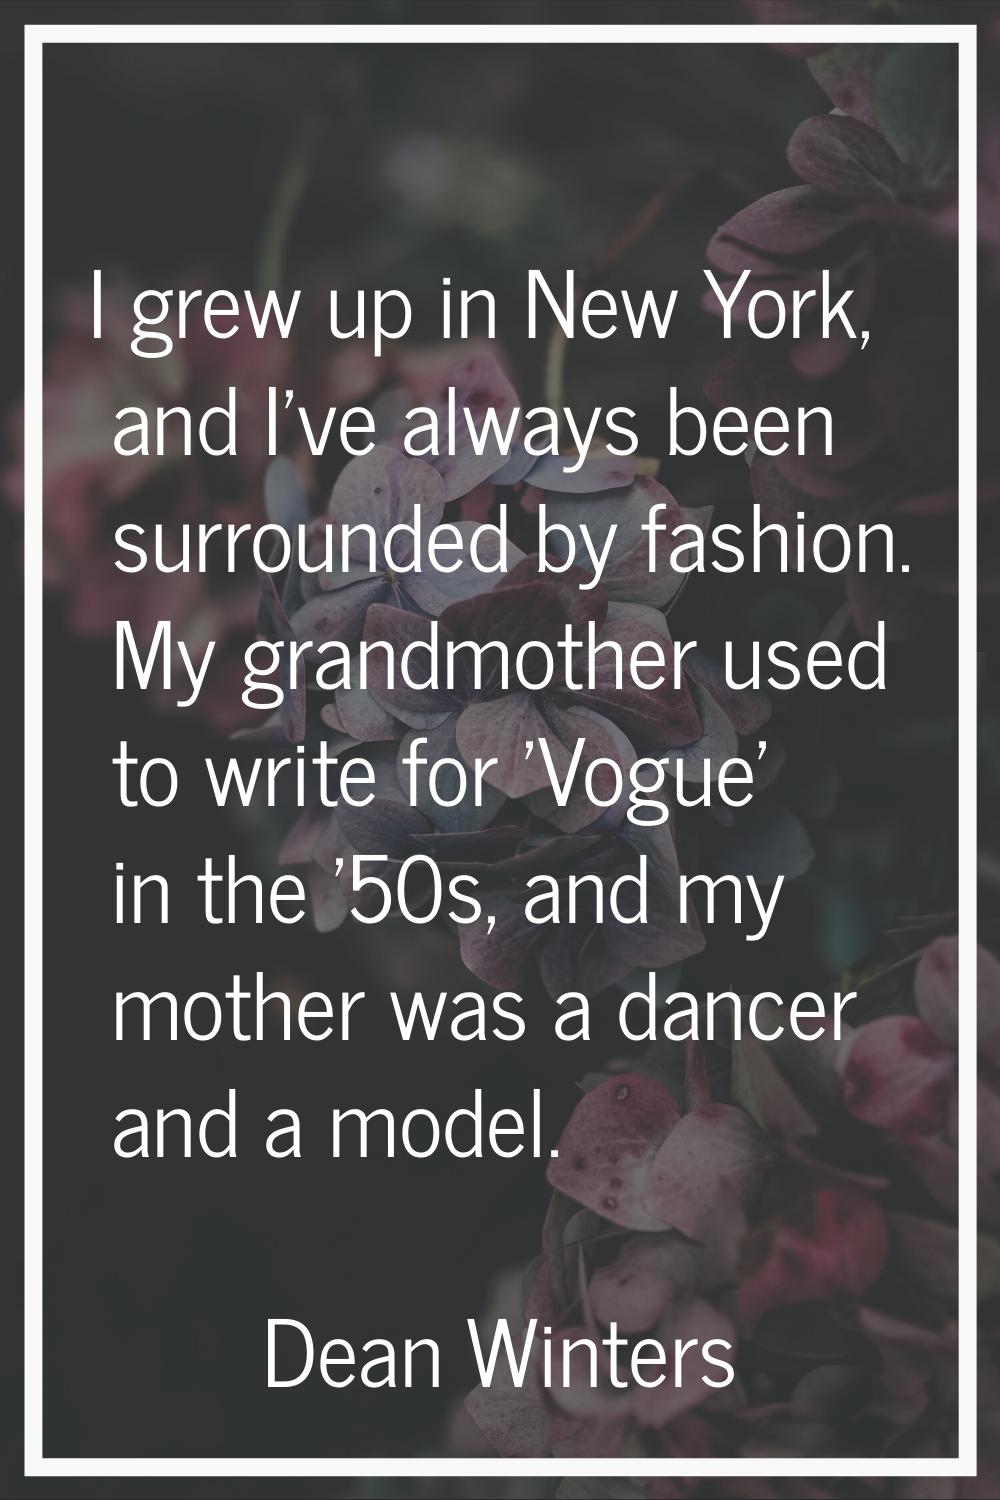 I grew up in New York, and I've always been surrounded by fashion. My grandmother used to write for